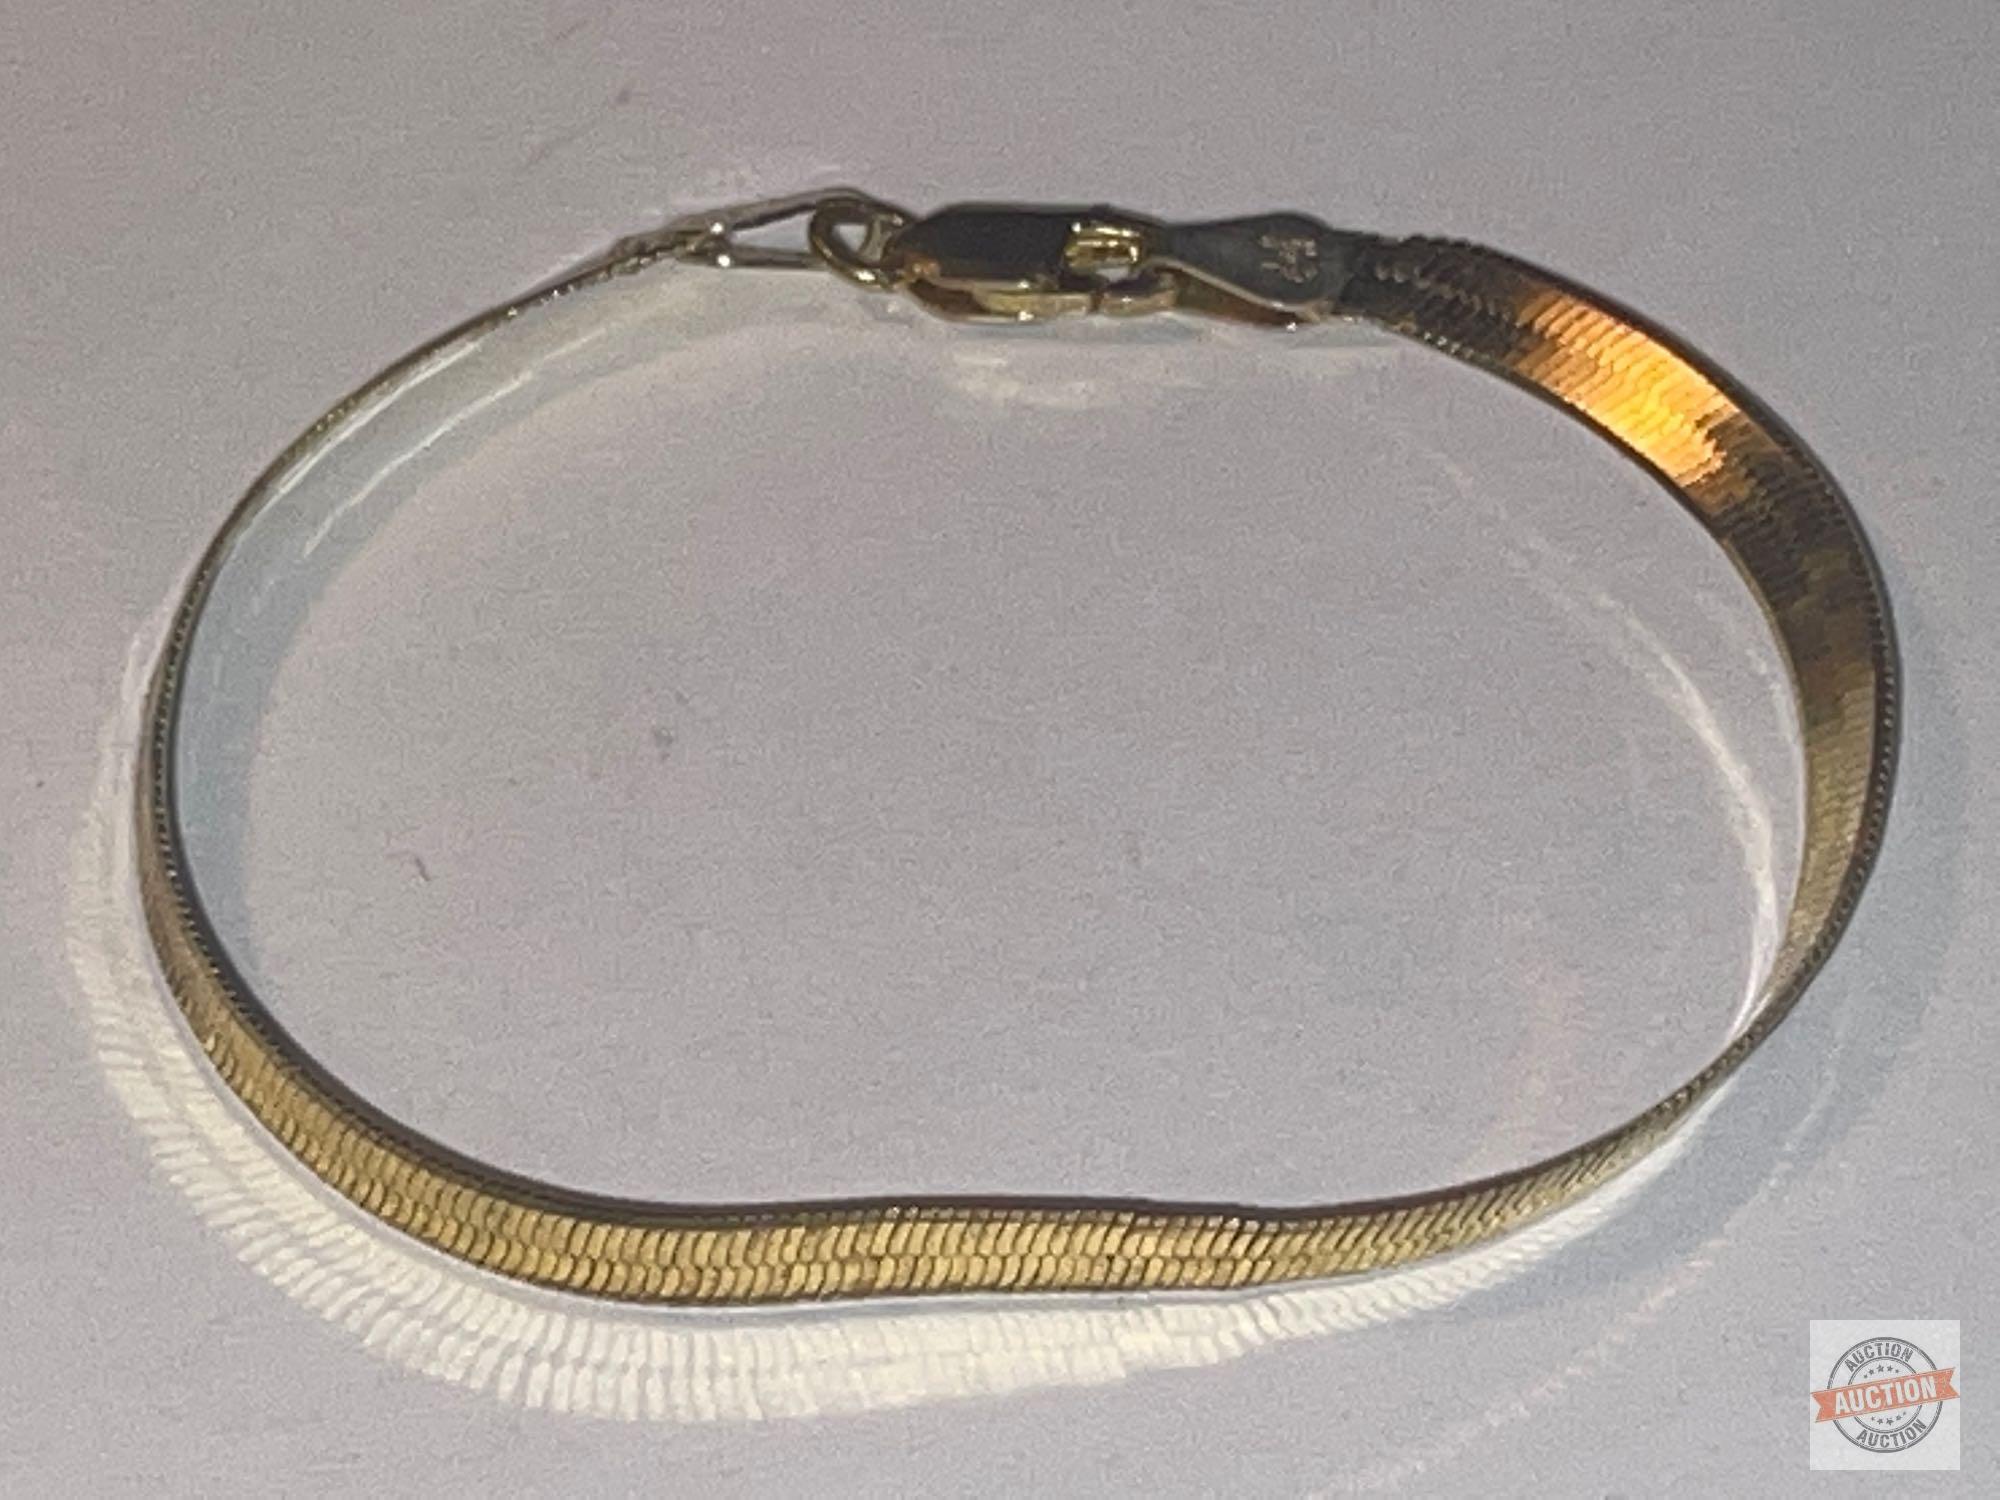 Jewelry - Bracelet, silver gold plated